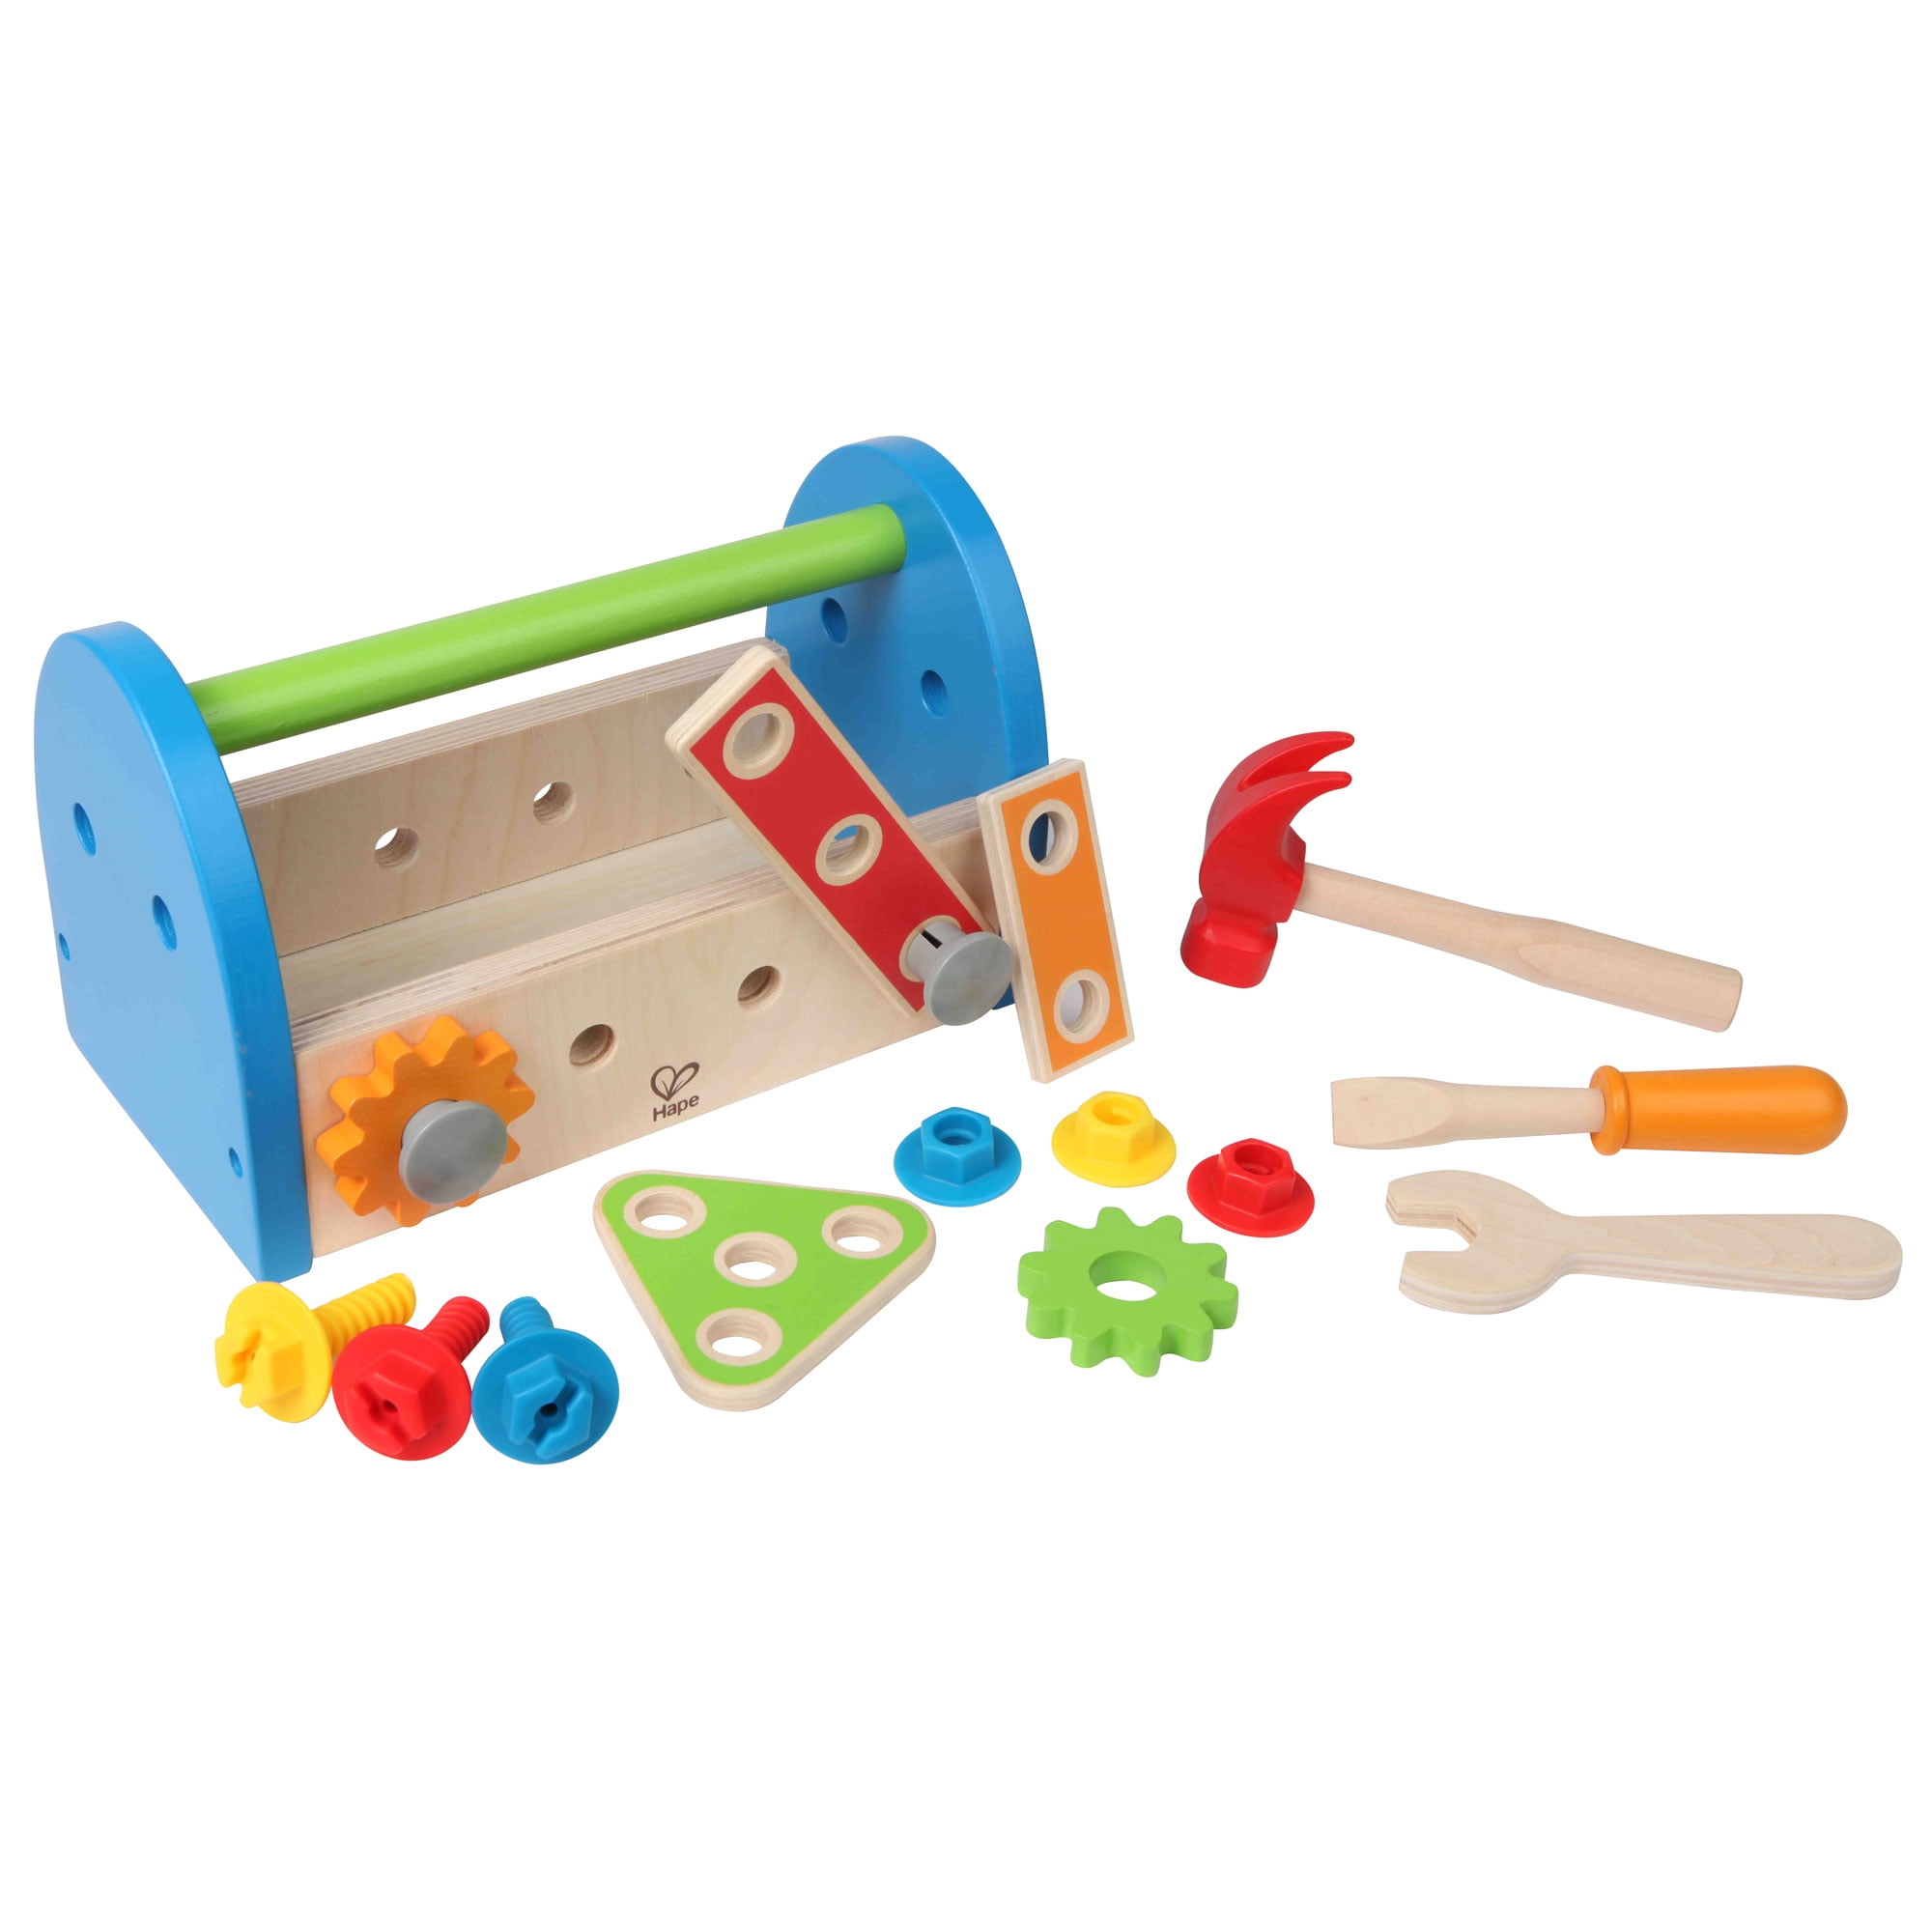 Melissa & Doug Hammer and Saw Tool Bench 32 pcs Wooden Building Set 